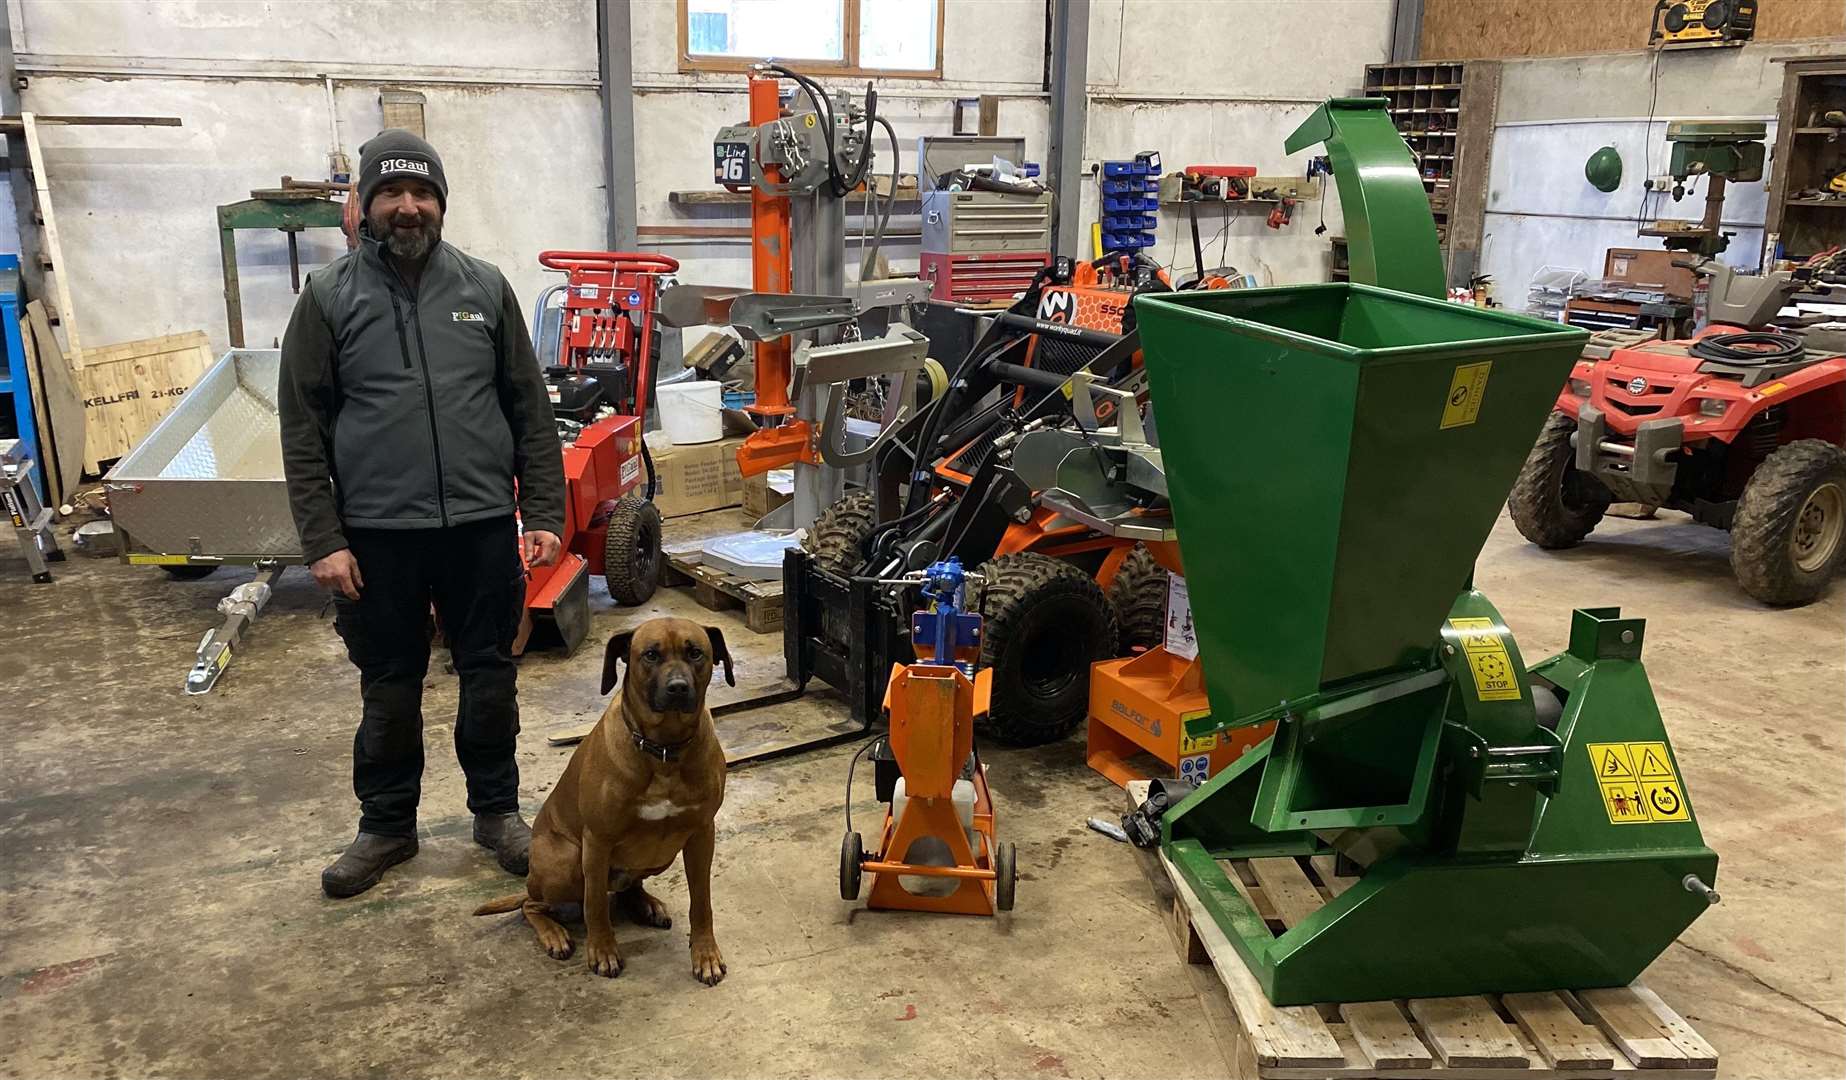 Alan Gaul and his dog Tau in the workshop of the family business.